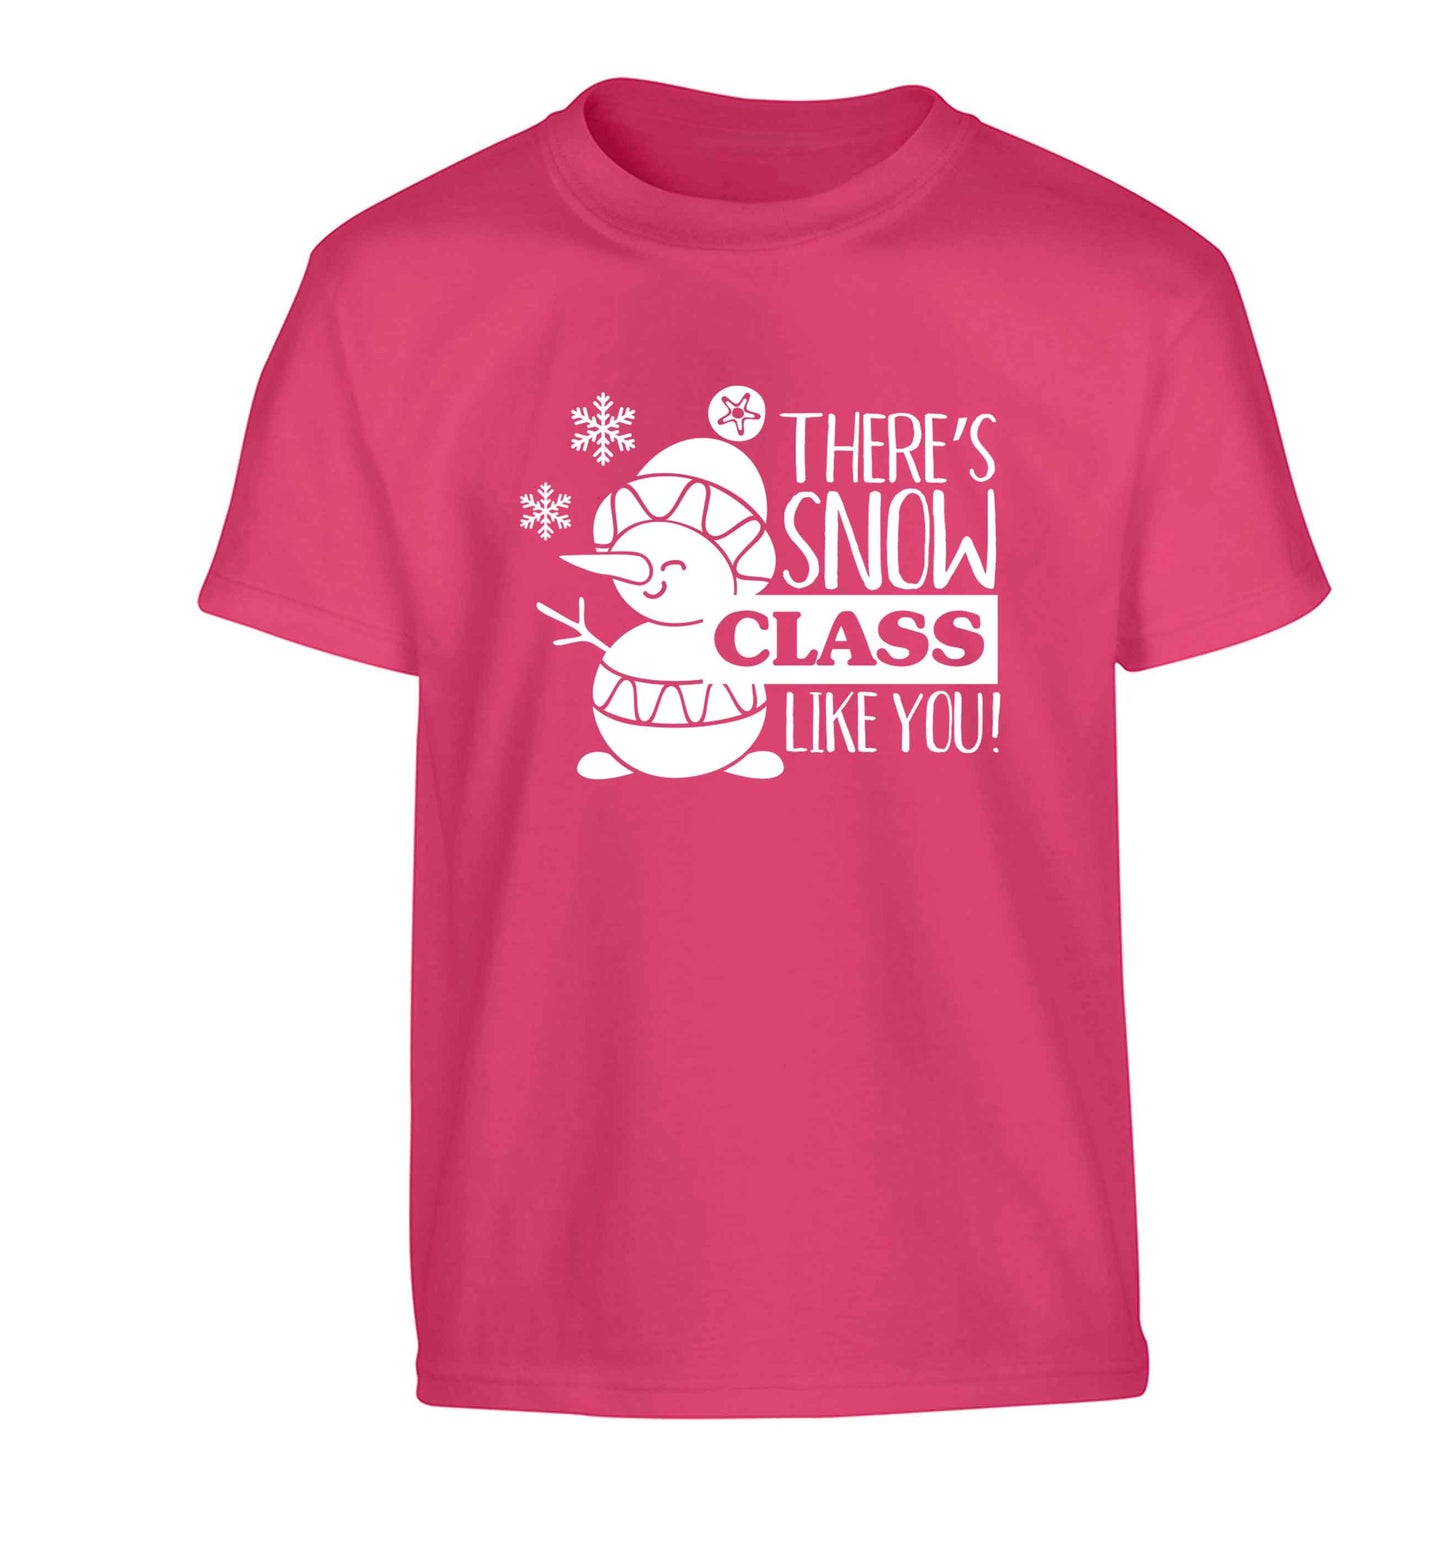 There's snow class like you Children's pink Tshirt 12-13 Years